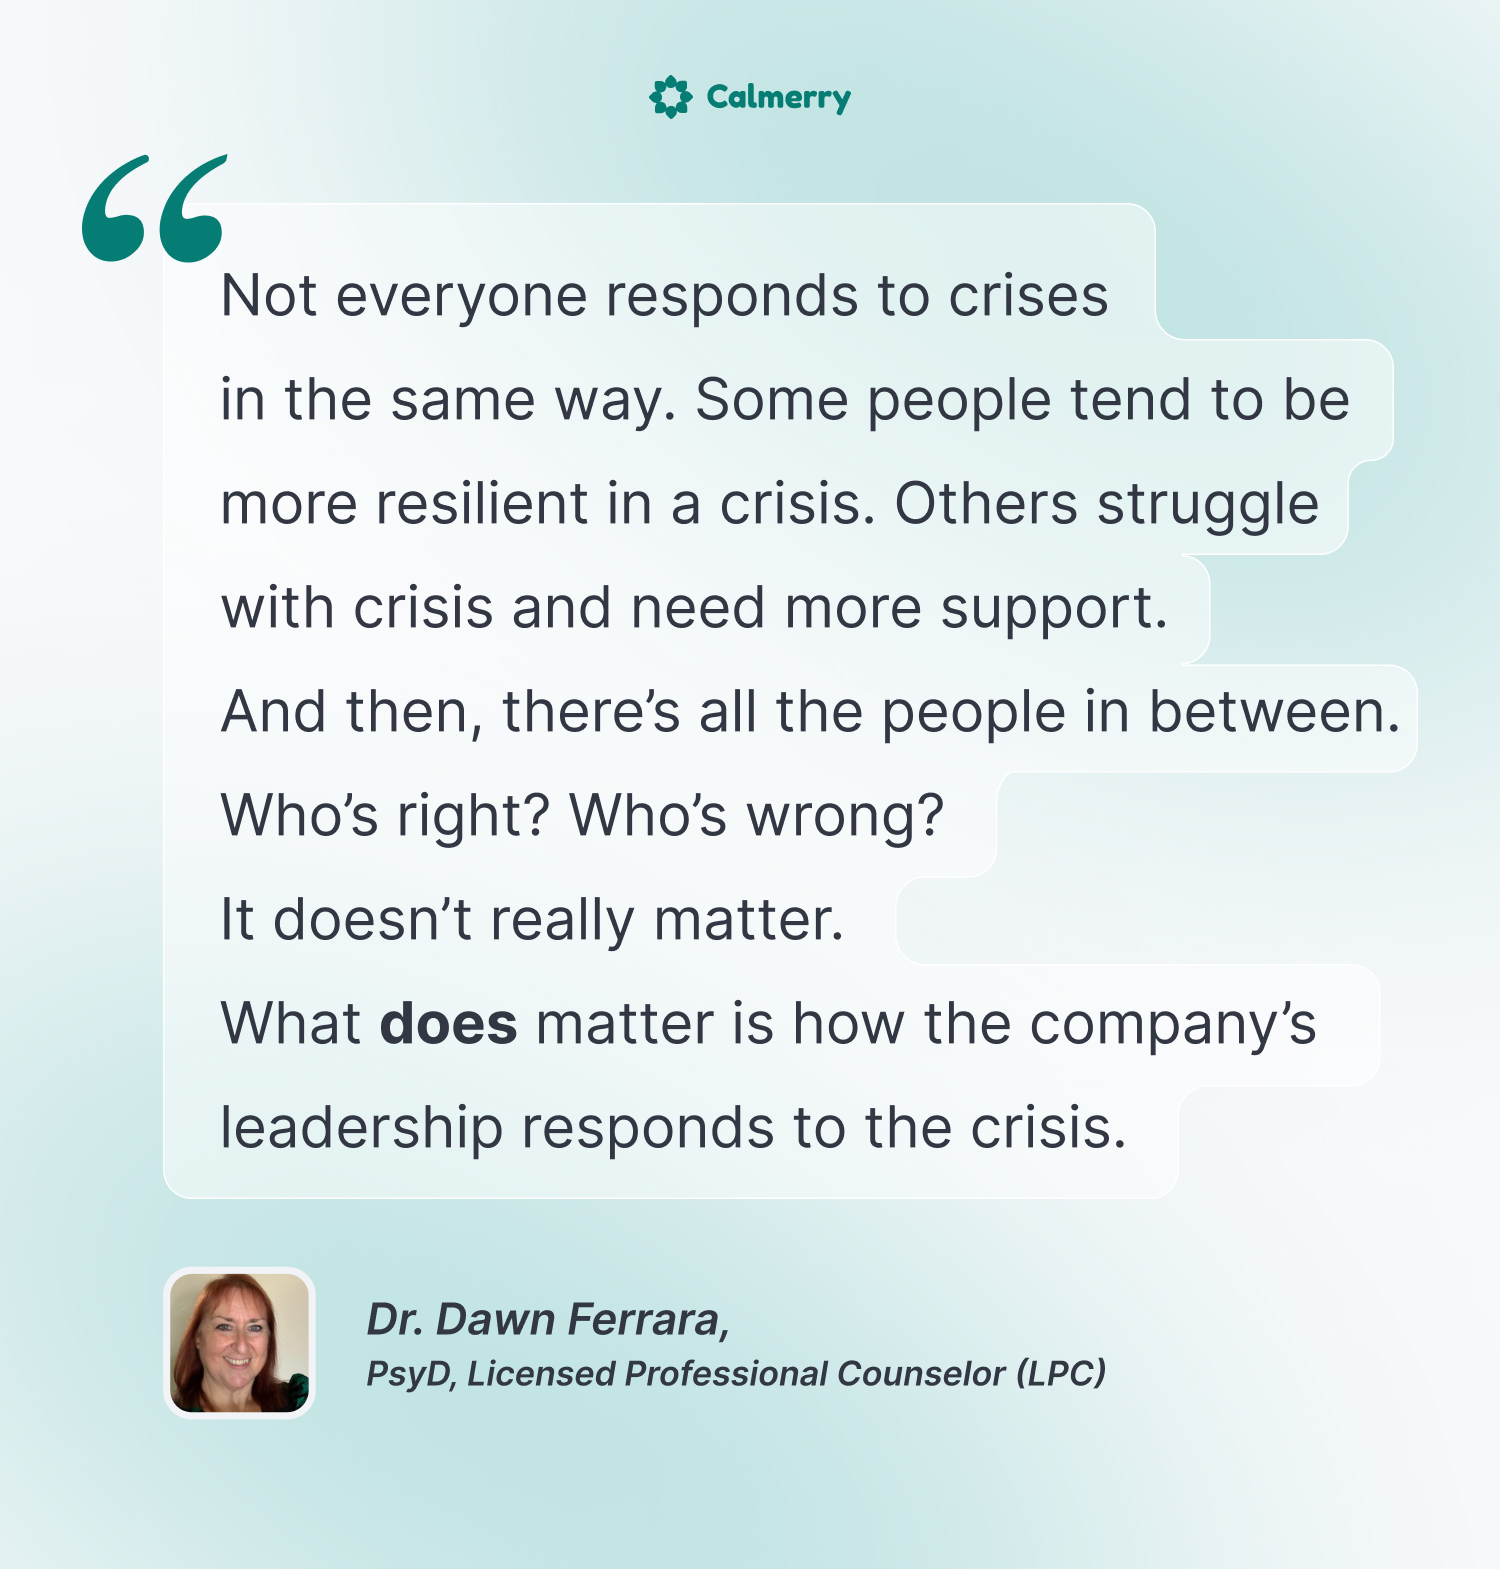 Not everyone responds to crises in the same way. Some people tend to be more resilient in a crisis. Others struggle with crisis and need more support. And then, there’s all the people in between. 
Who’s right? Who’s wrong? It doesn’t really matter.  
What does matter is how the company’s leadership responds to the crisis. 
Dr. Dawn Ferrara
PsyD, Licensed Professional Counselor (LPC)